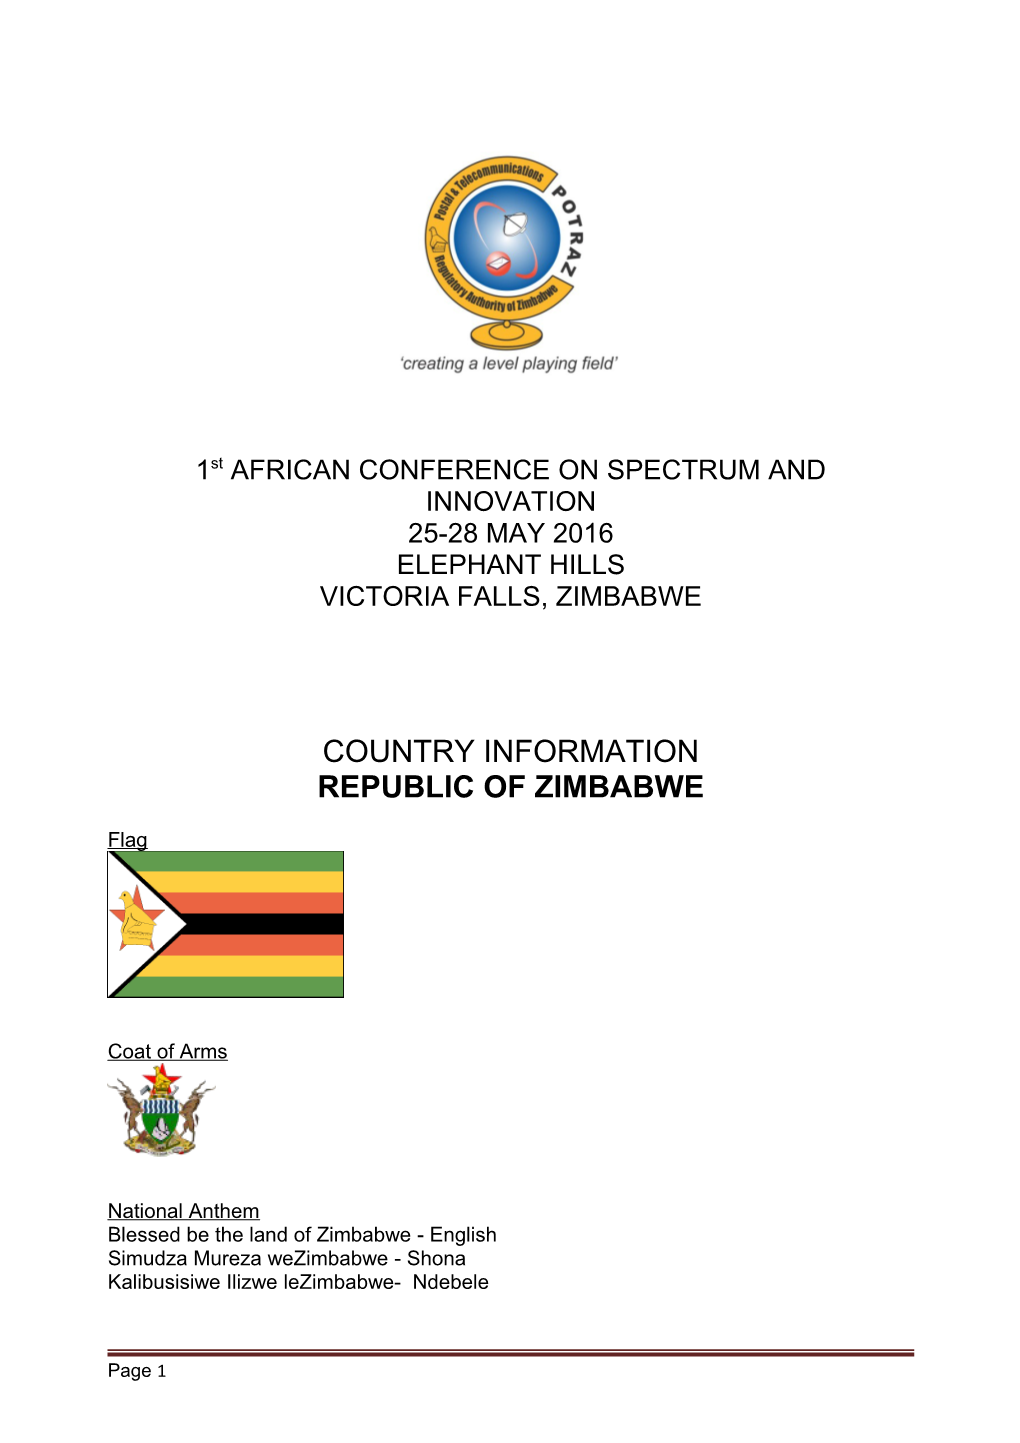 1St AFRICAN CONFERENCE on SPECTRUM and INNOVATION